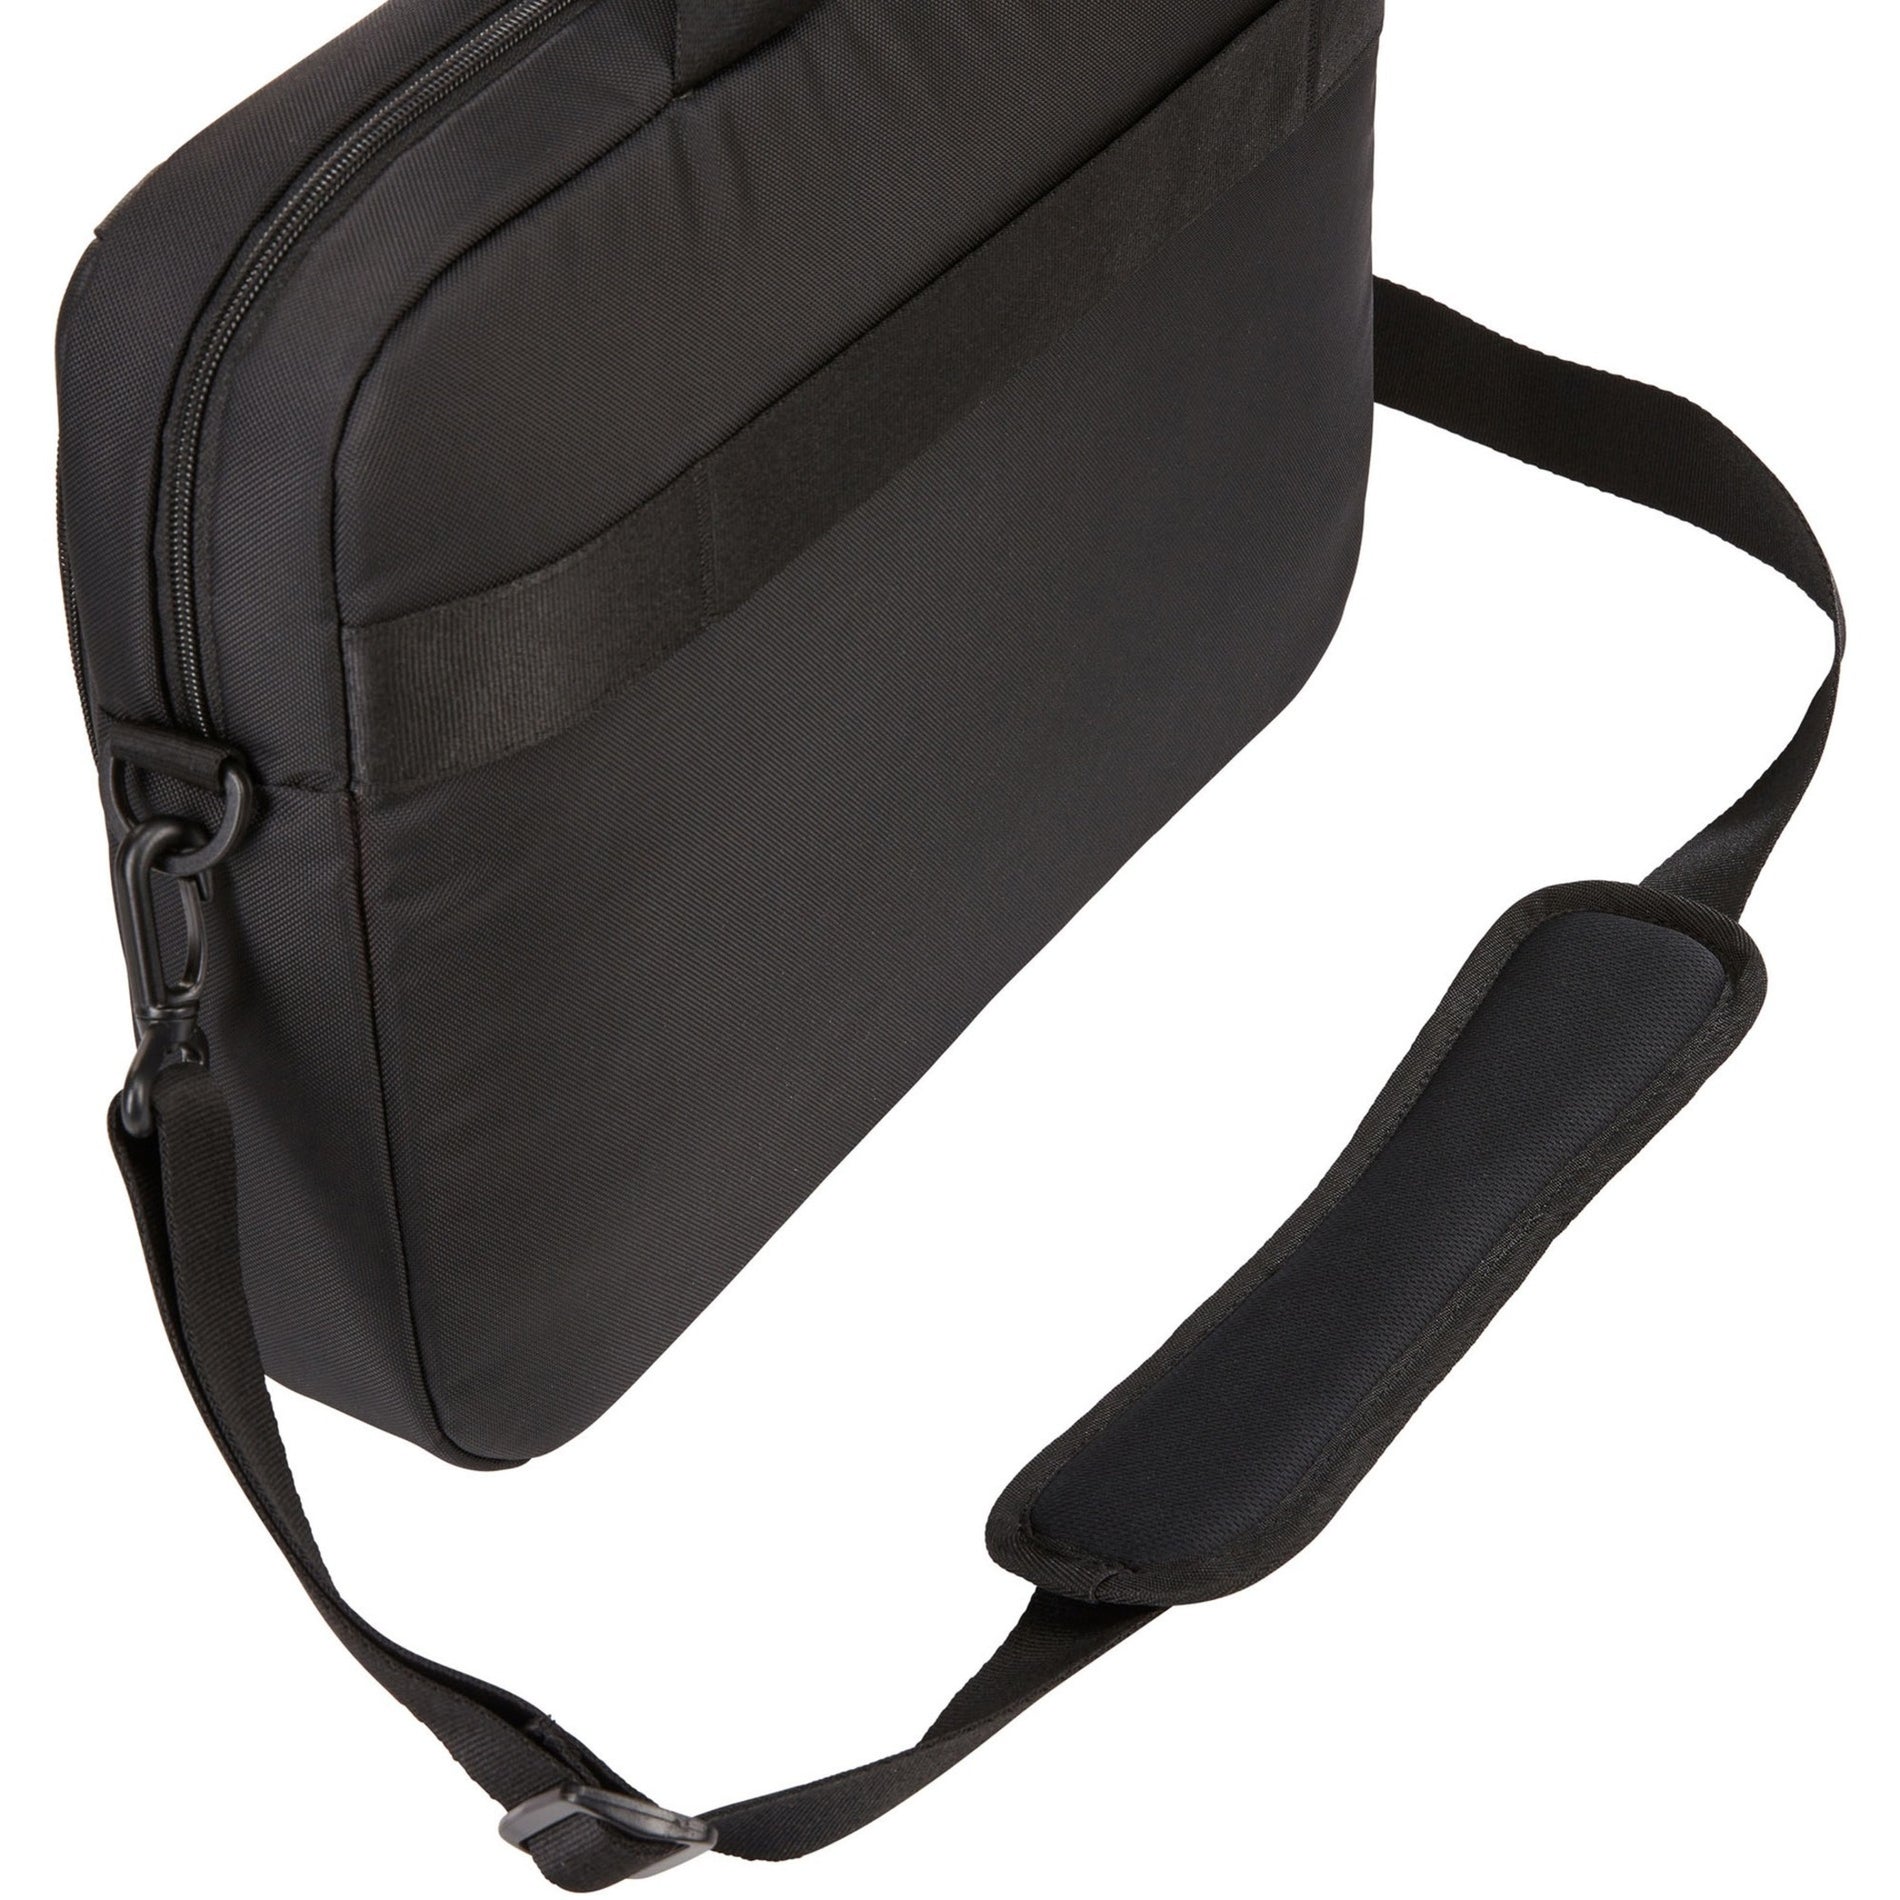 Case Logic 3204527 PROPEL ATT 15.6IN BLACK, Travel/Luggage Case with Laptop and Tablet Compartment